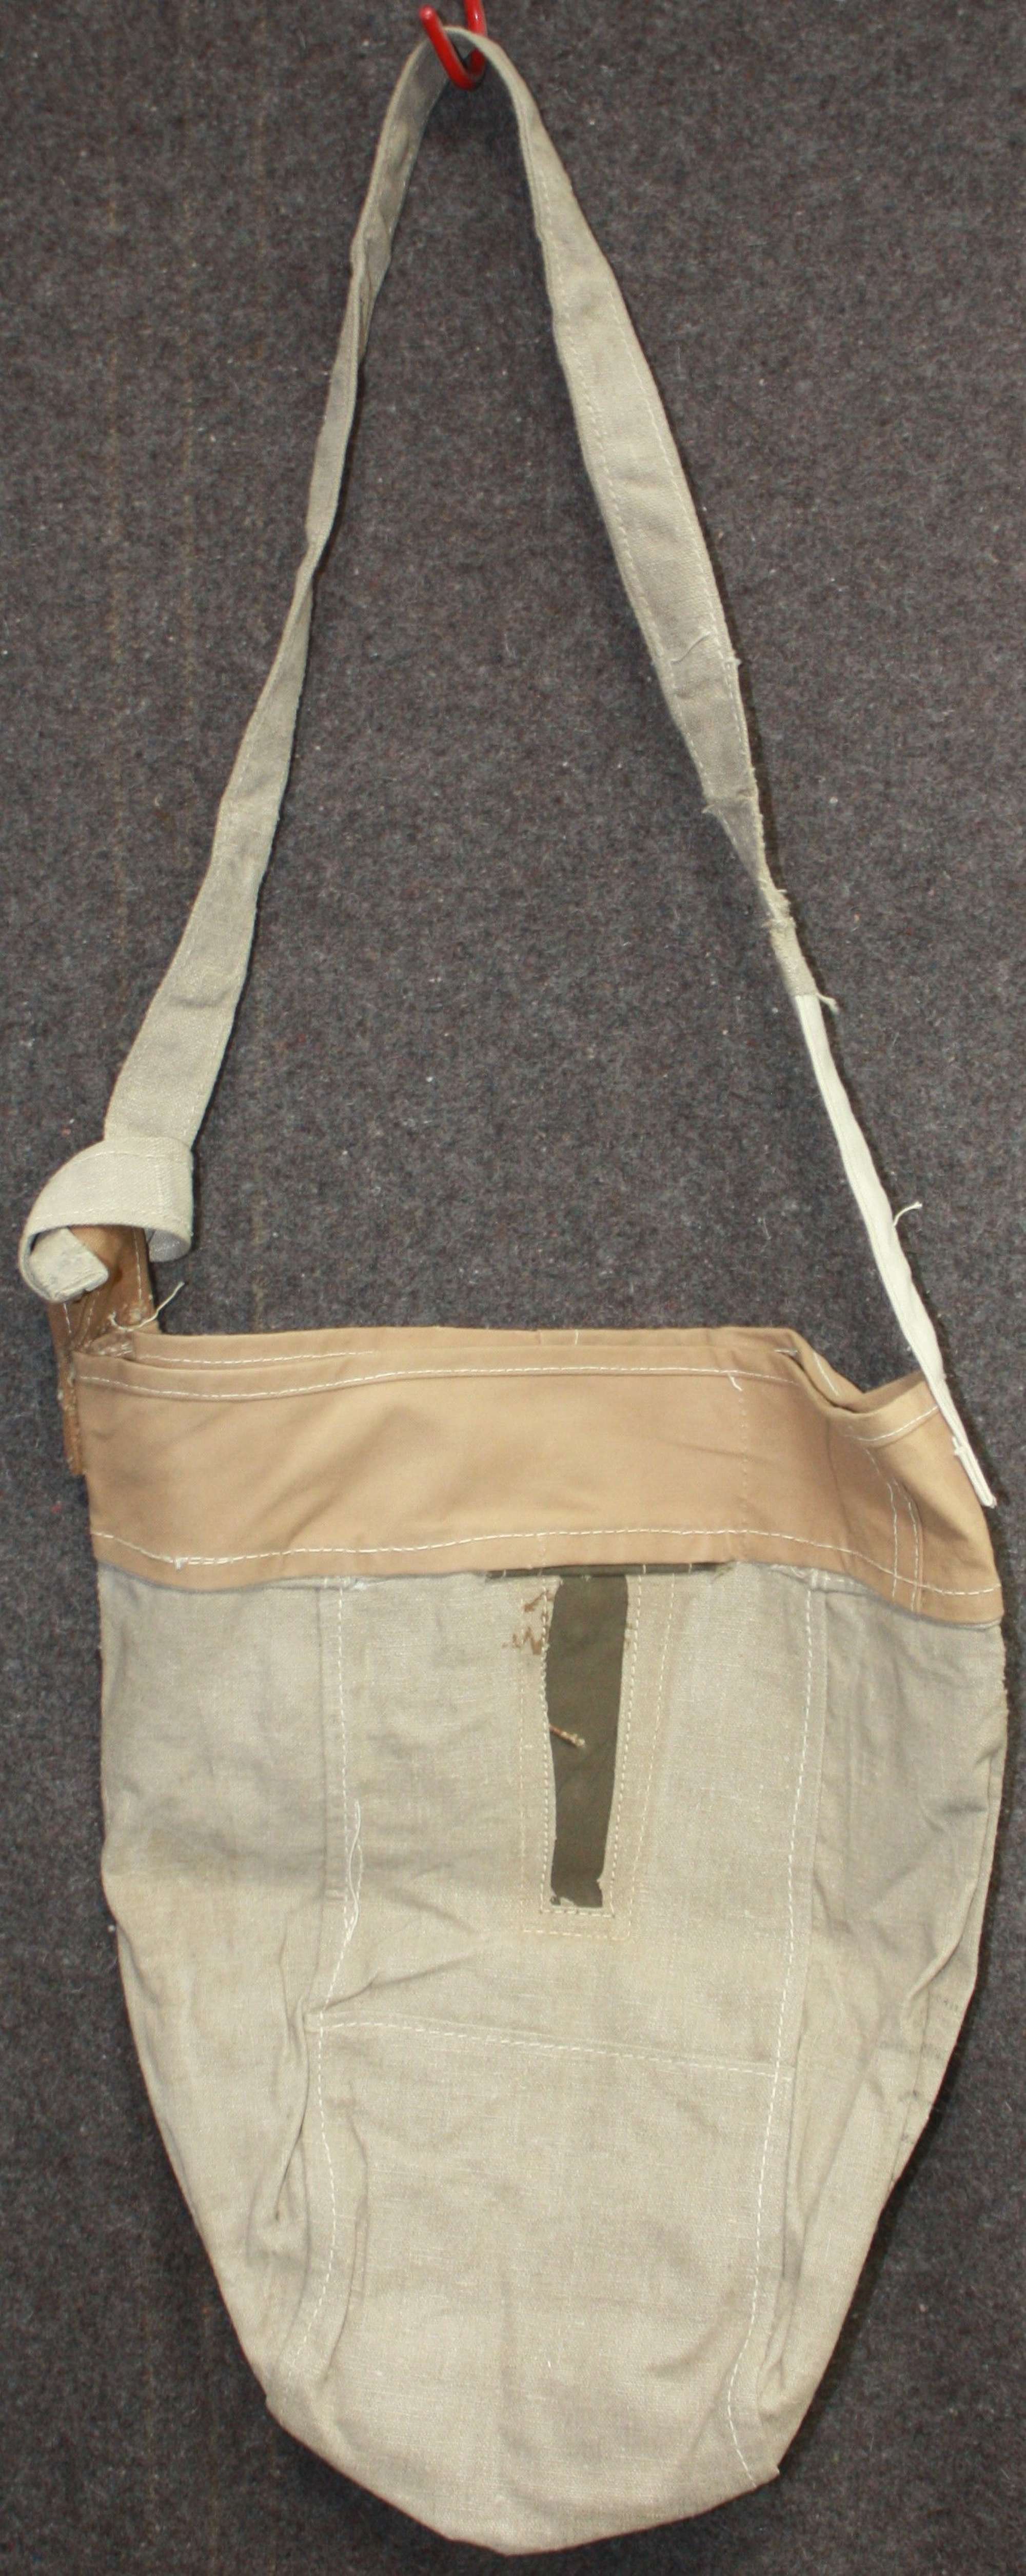 A SCARCE WWII HORSE OR MULE NOSE BAG